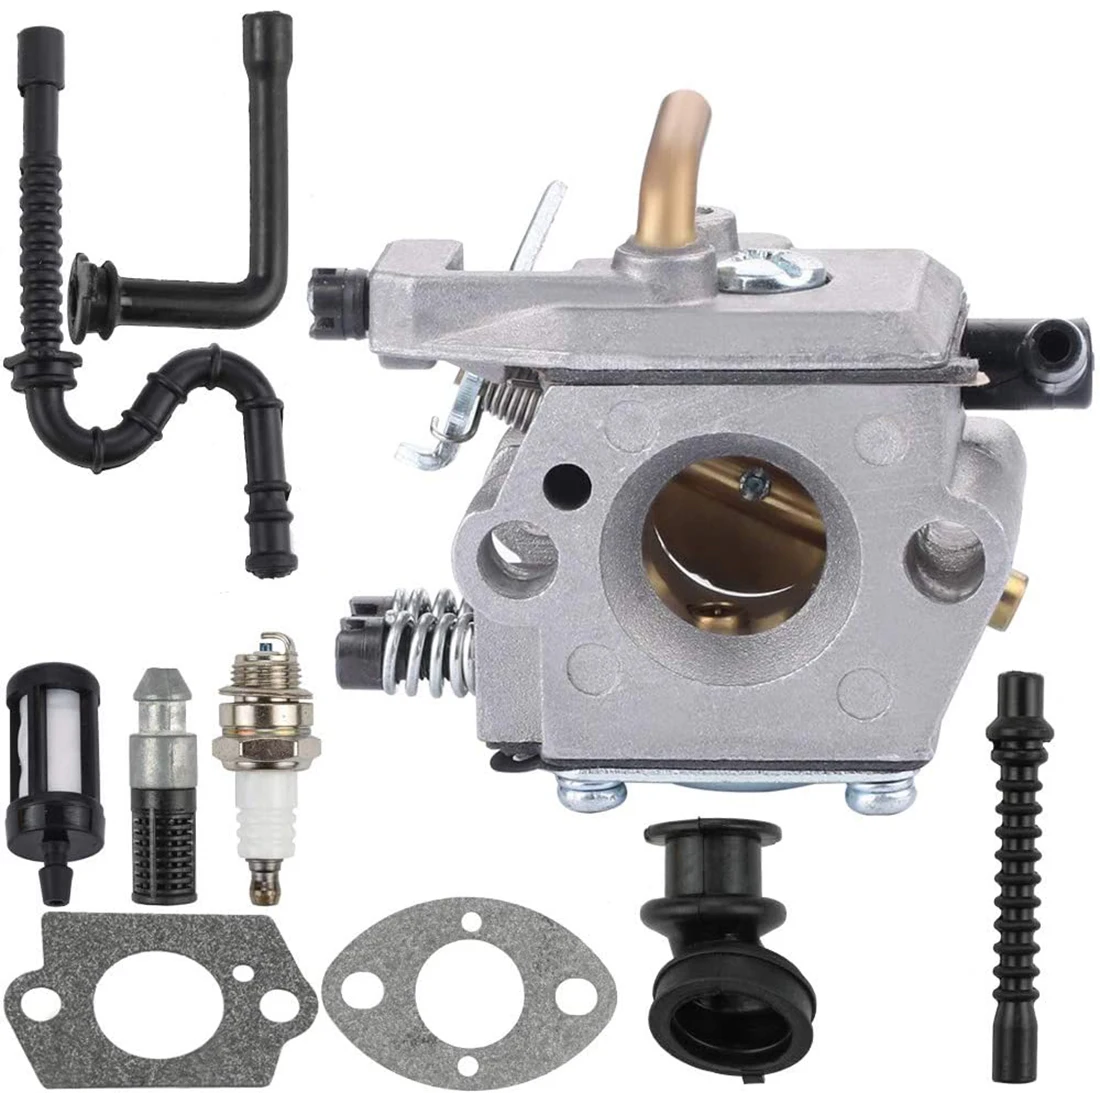 

WT-194 Carburetor Carb for sthil 024 026 024AV 024S MS240 MS260 Chainsaws Parts Replace 1121 120 0611